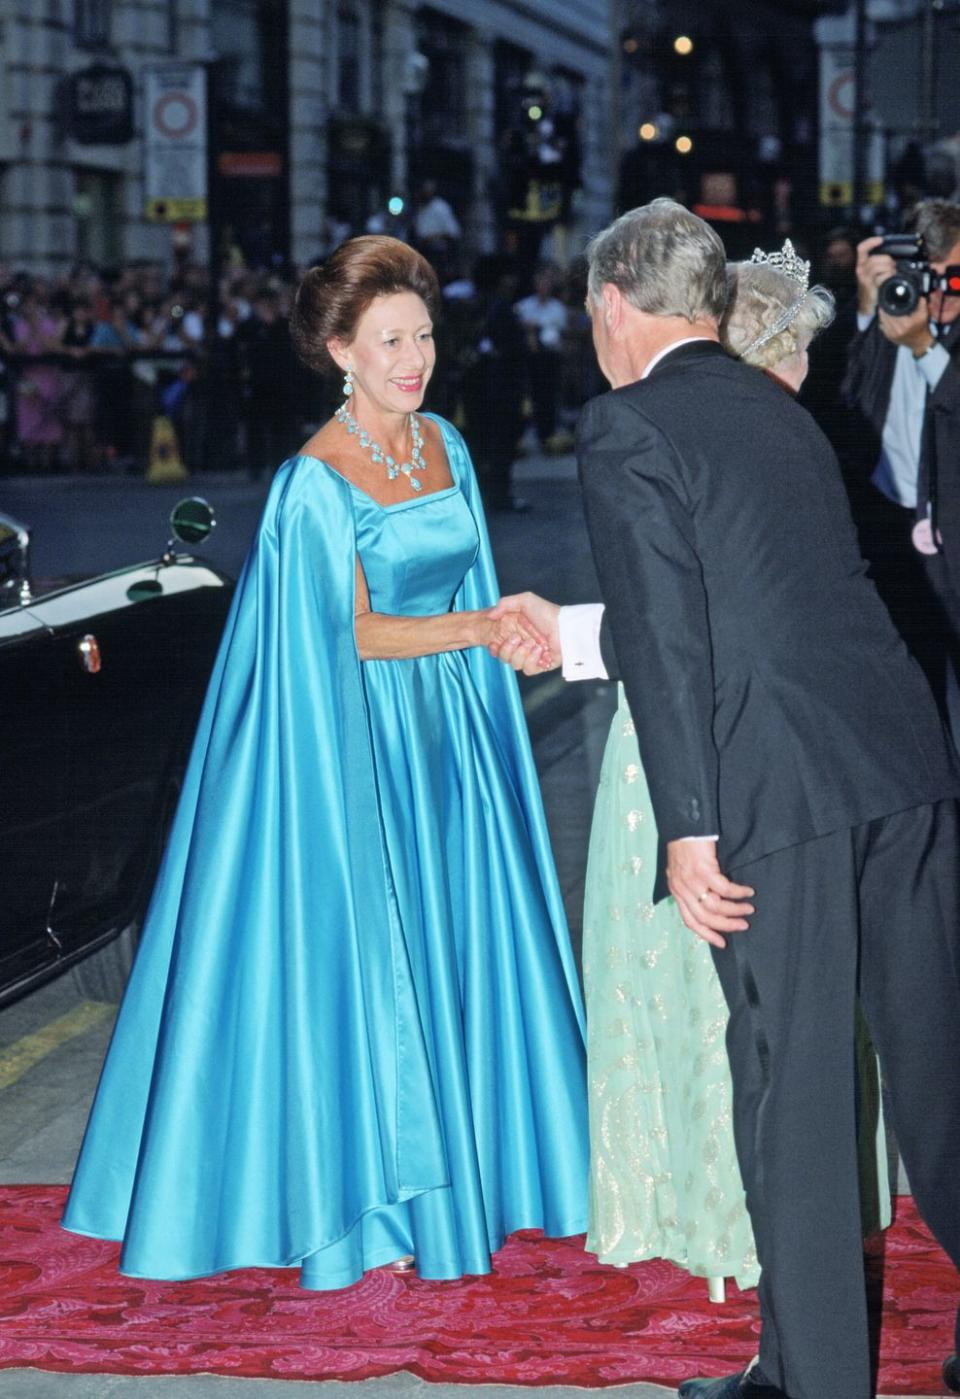 <p>In the summer of 1990, Princess Margaret was on hand to celebrate the Queen Mother's 90th birthday at the London Palladium. She wore this icy-blue number for the occasion, along with a blue necklace and earrings. </p>